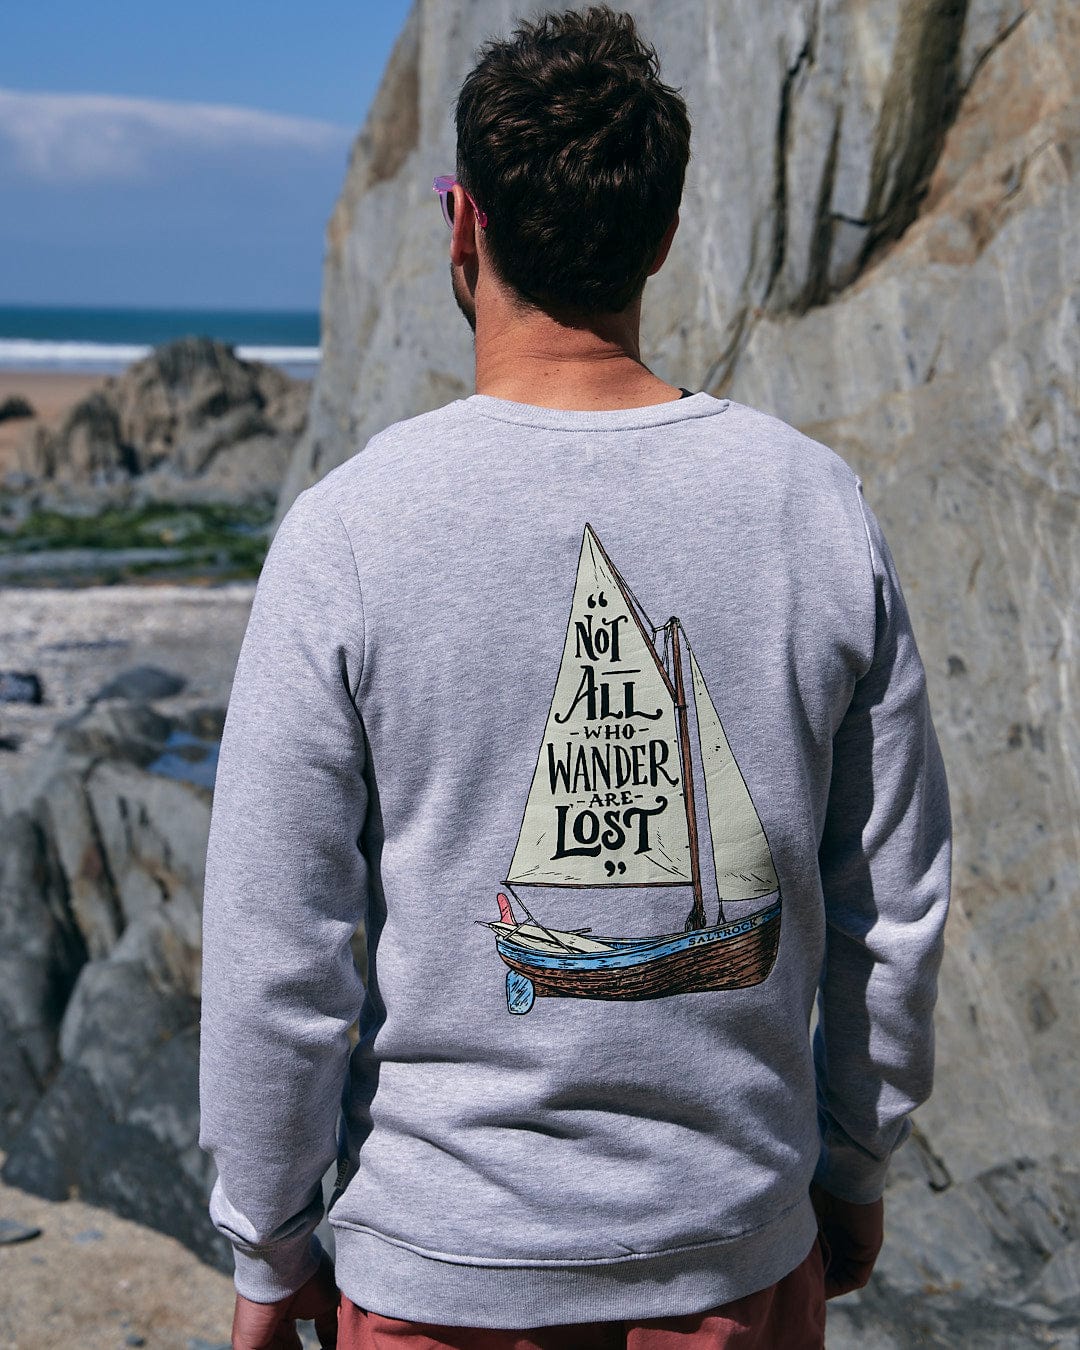 The back of a man wearing a Saltrock sweatshirt with the Lost Ships - Mens Crew Sweat - Grey sailboat on it.